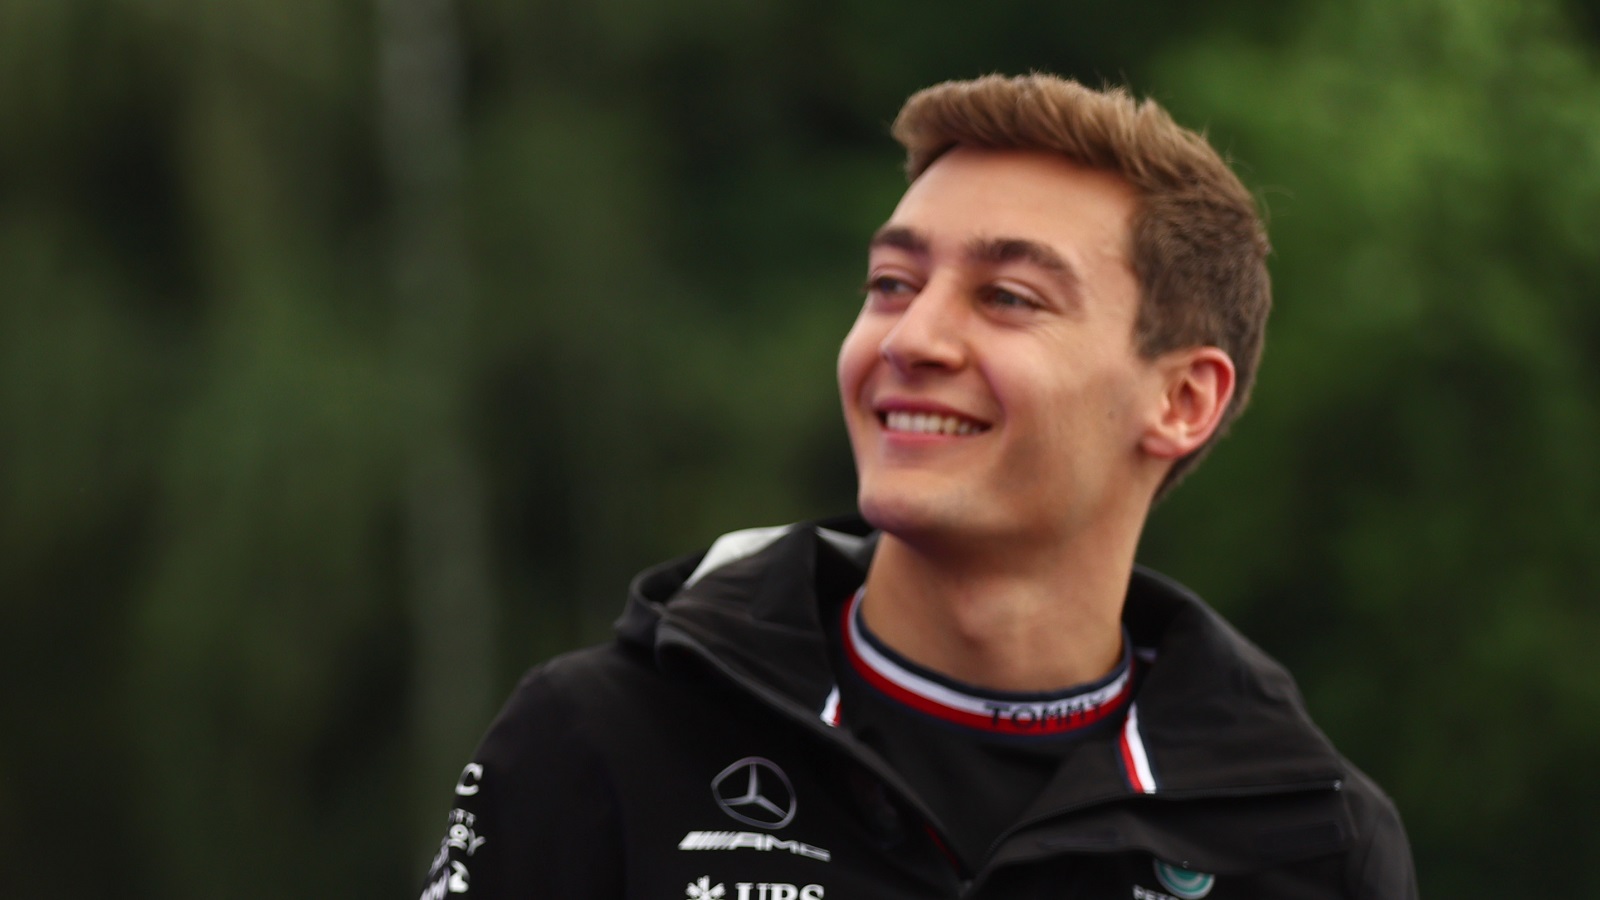 George Russell talks on the fan stage prior to practice ahead of the Formula 1 Grand Prix of Austria at Red Bull Ring on July 9, 2022, in Spielberg, Austria.